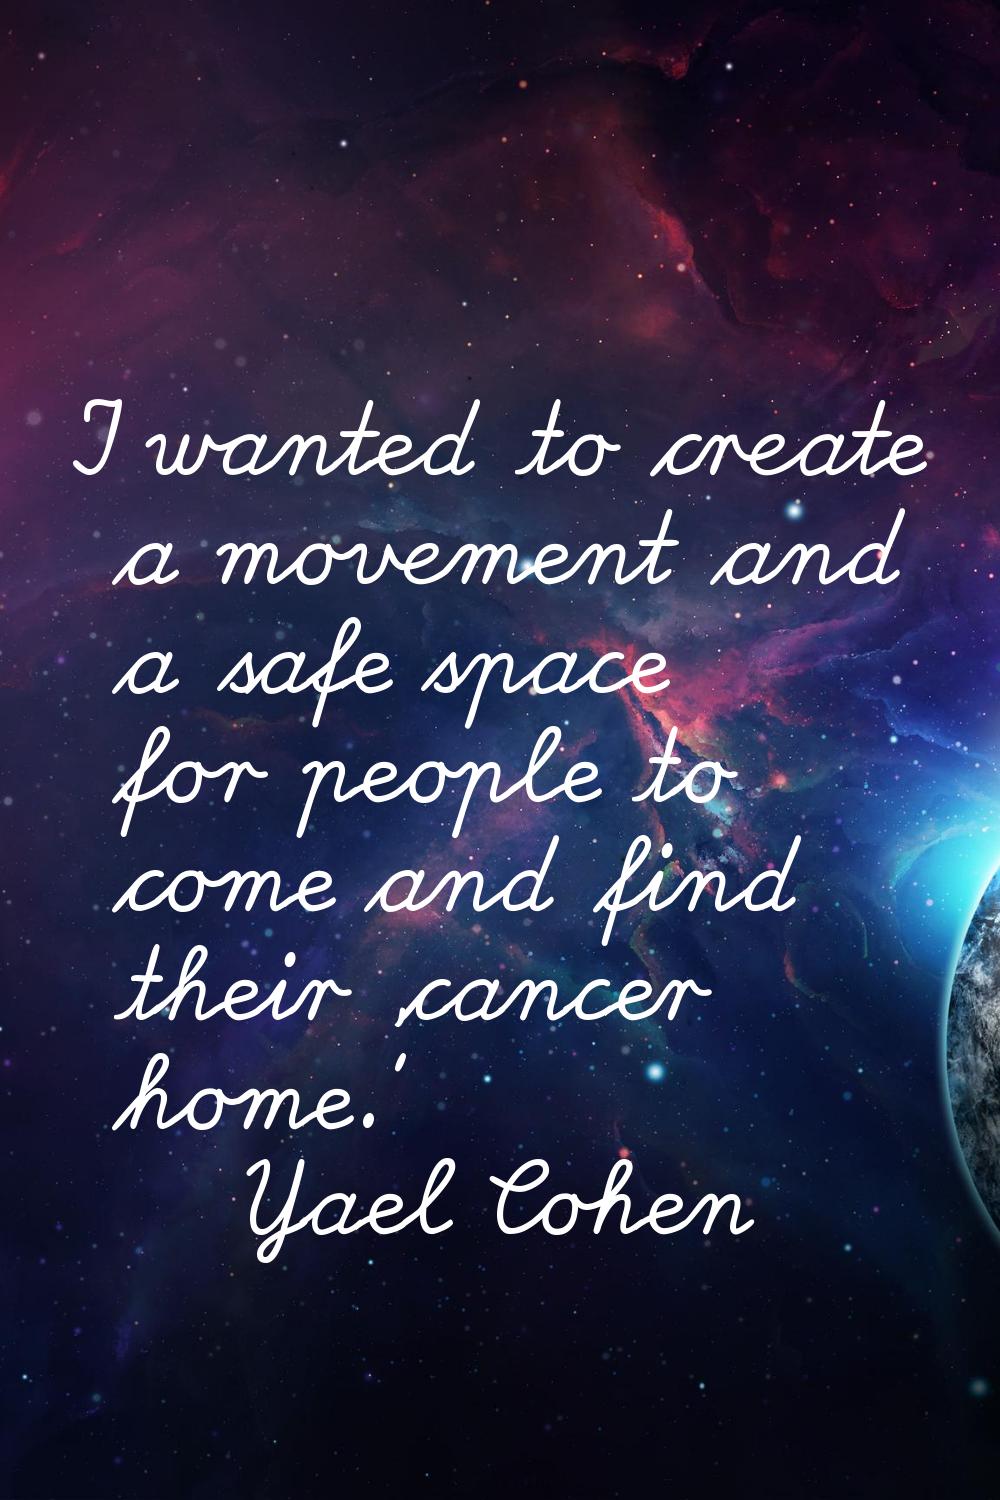 I wanted to create a movement and a safe space for people to come and find their 'cancer home.'